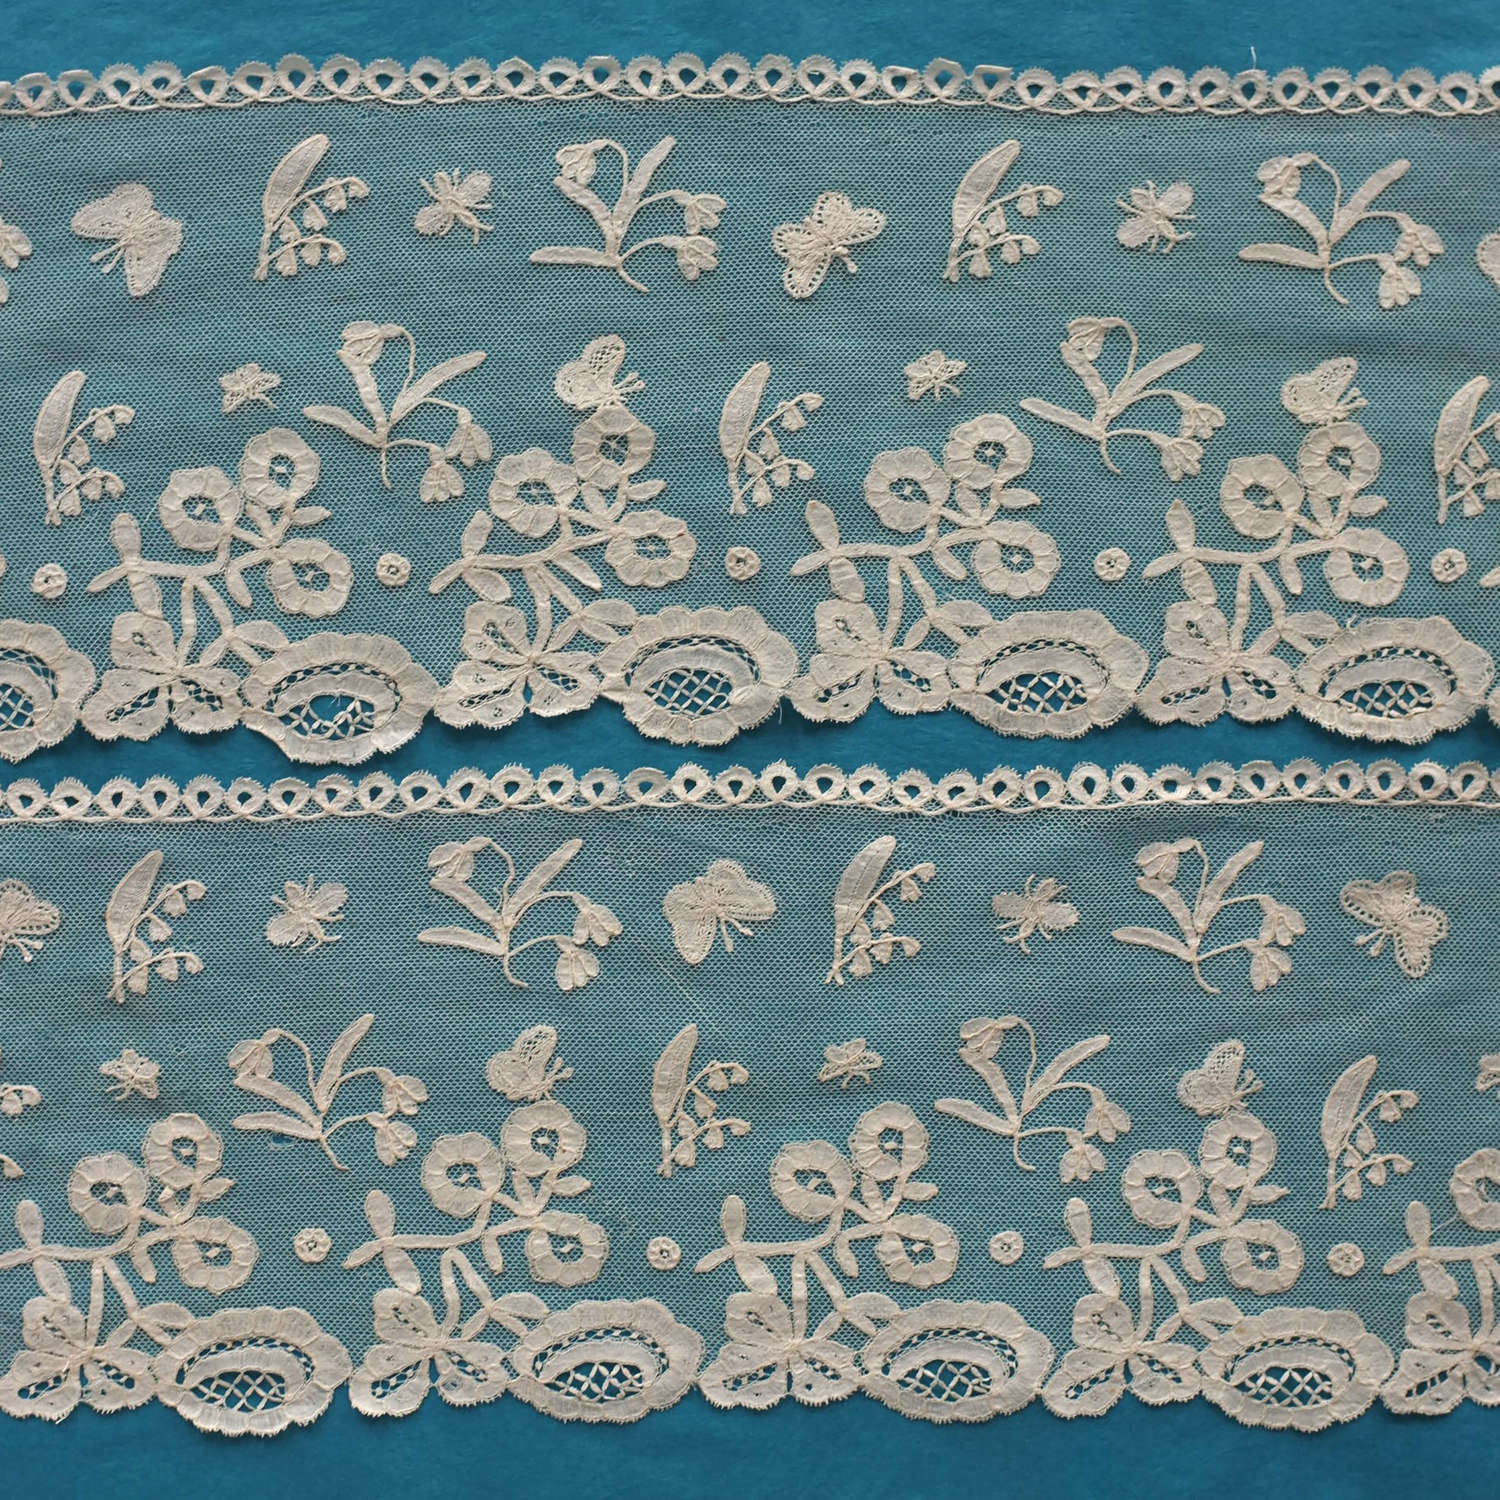 Antique Honiton Applique Lace Border with Butterflies and Bees.